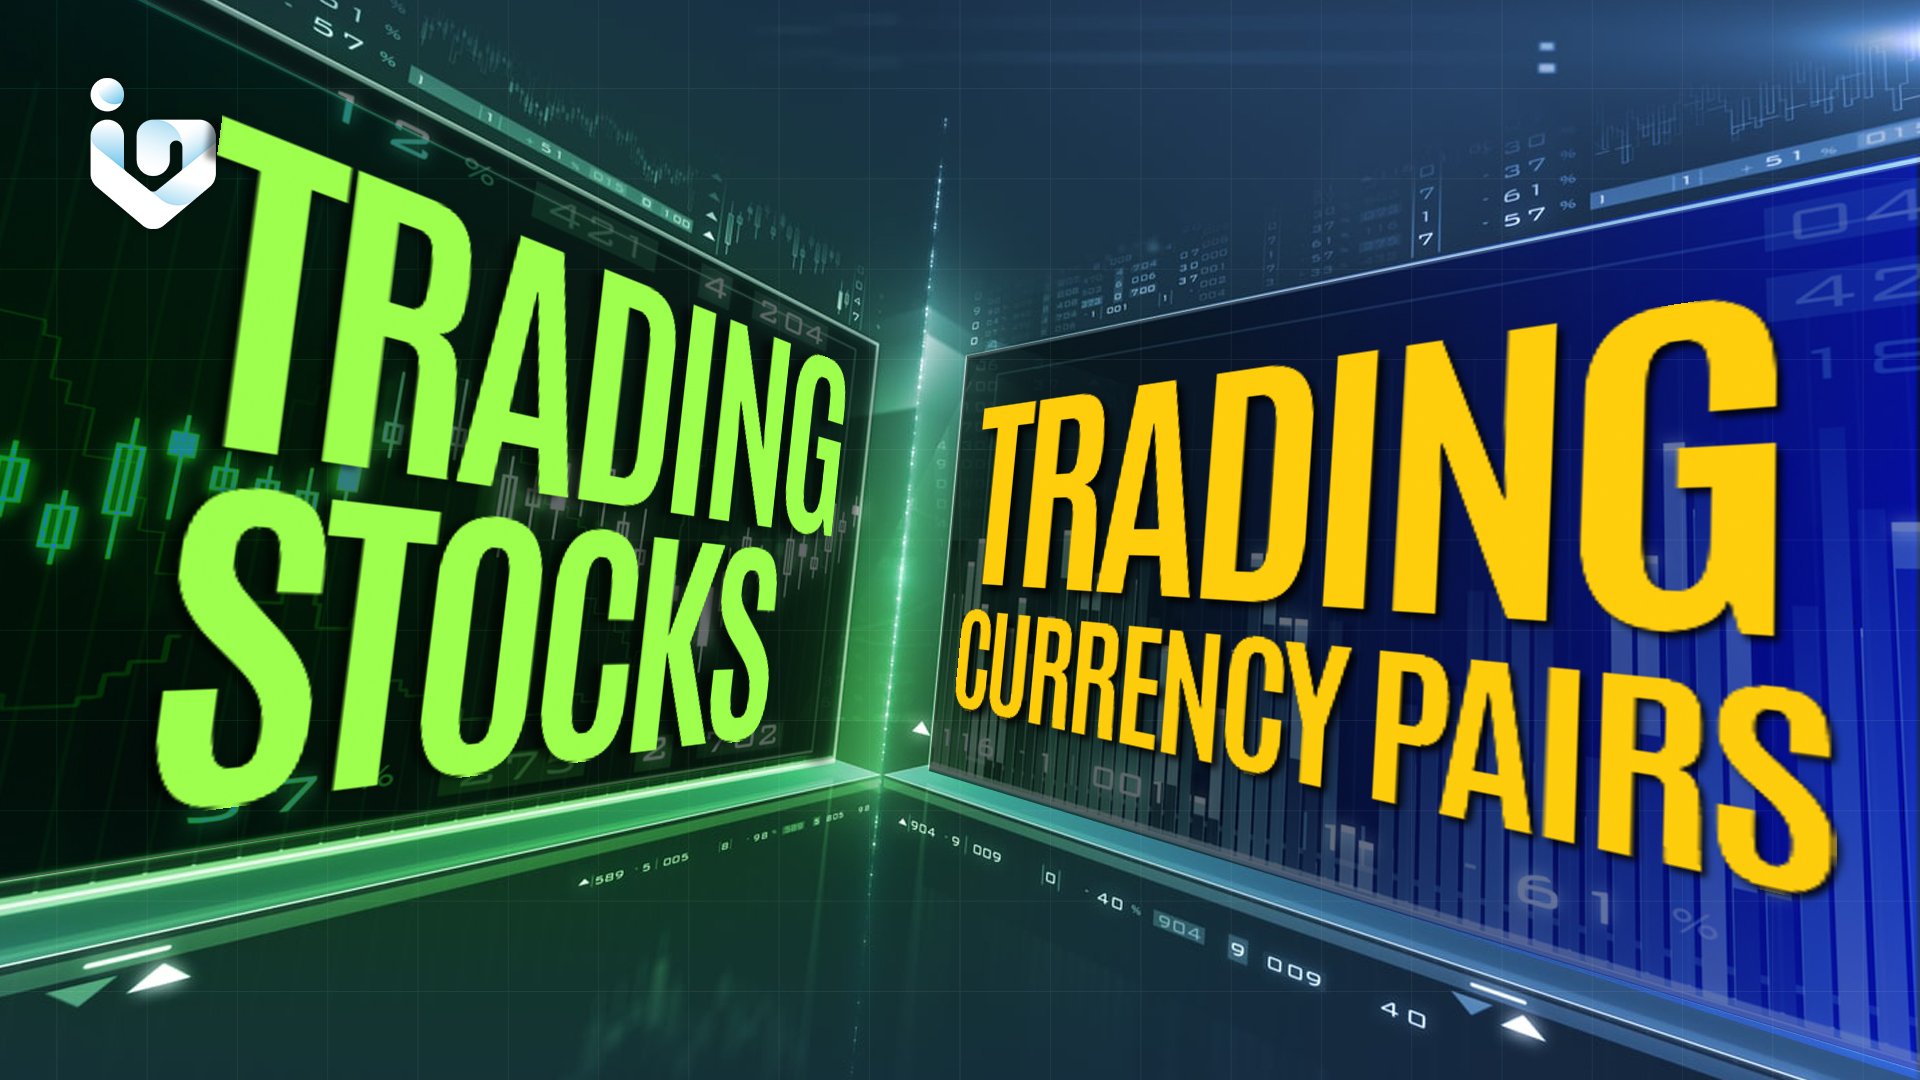 The Nuances Between Trading Stocks and Trading Currency Pairs